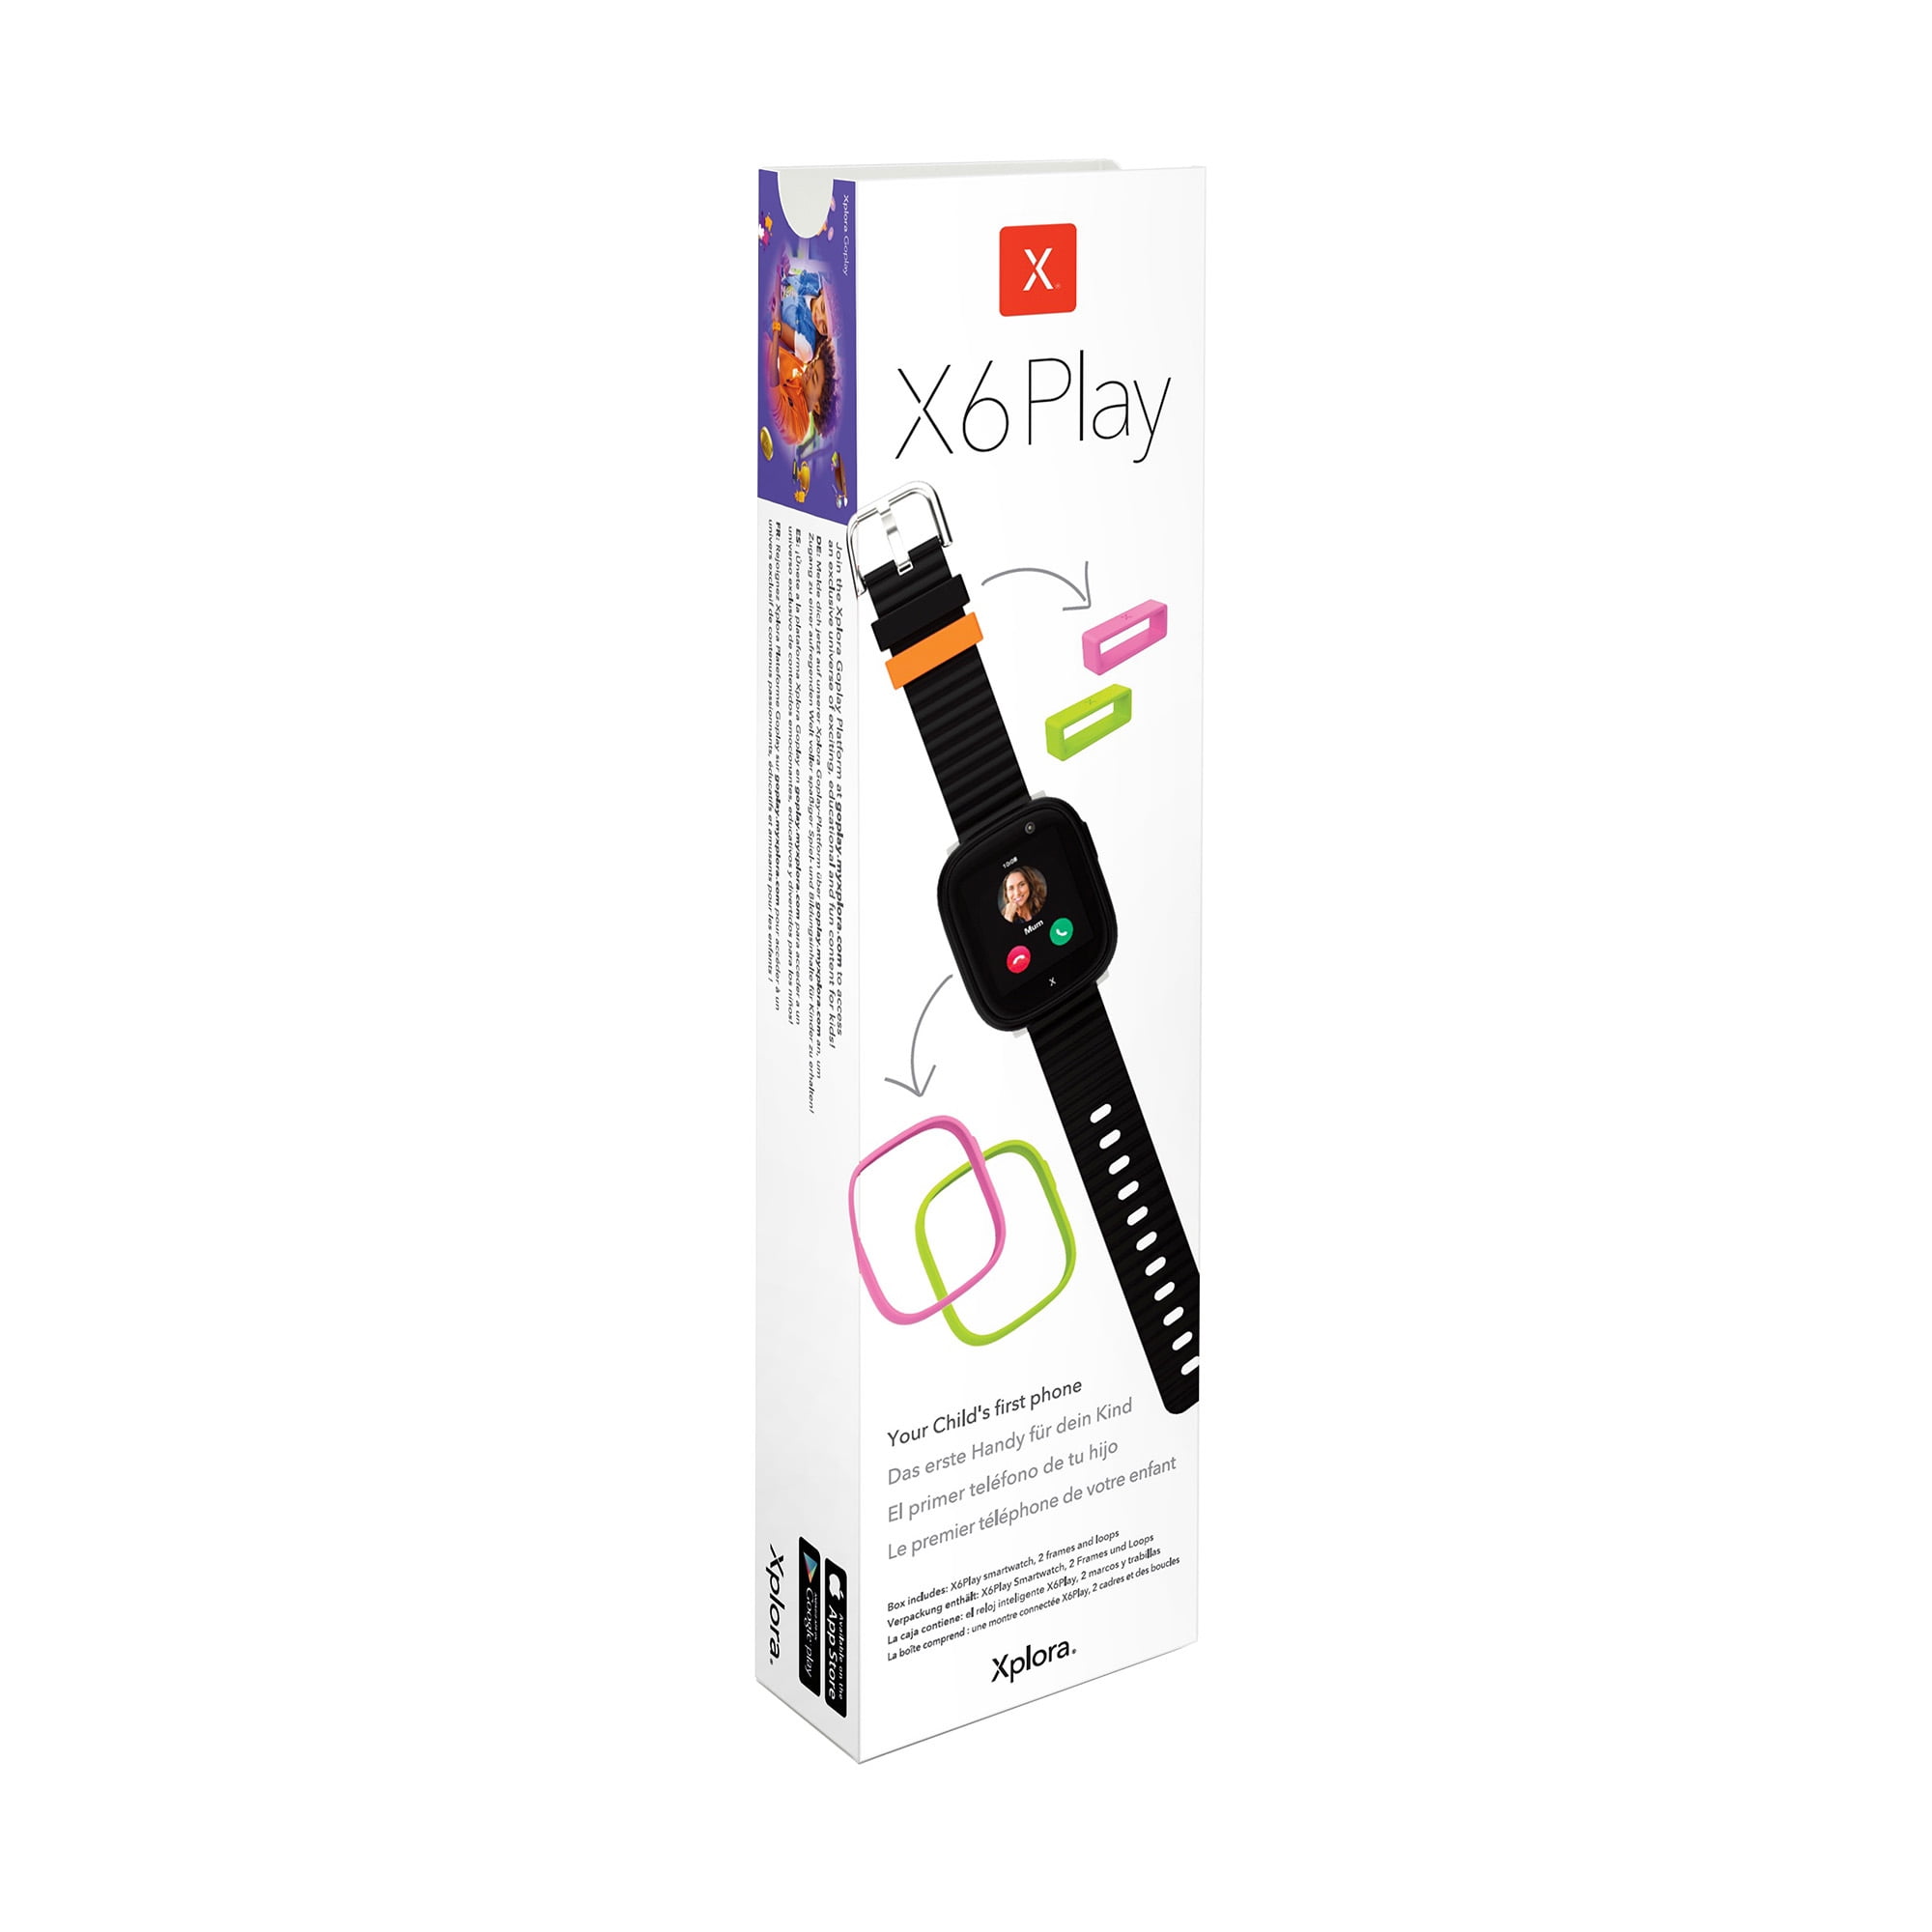 Xplora X6Play Kids Smart Watch Cell Phone with GPS Tracker | alle Smartwatches